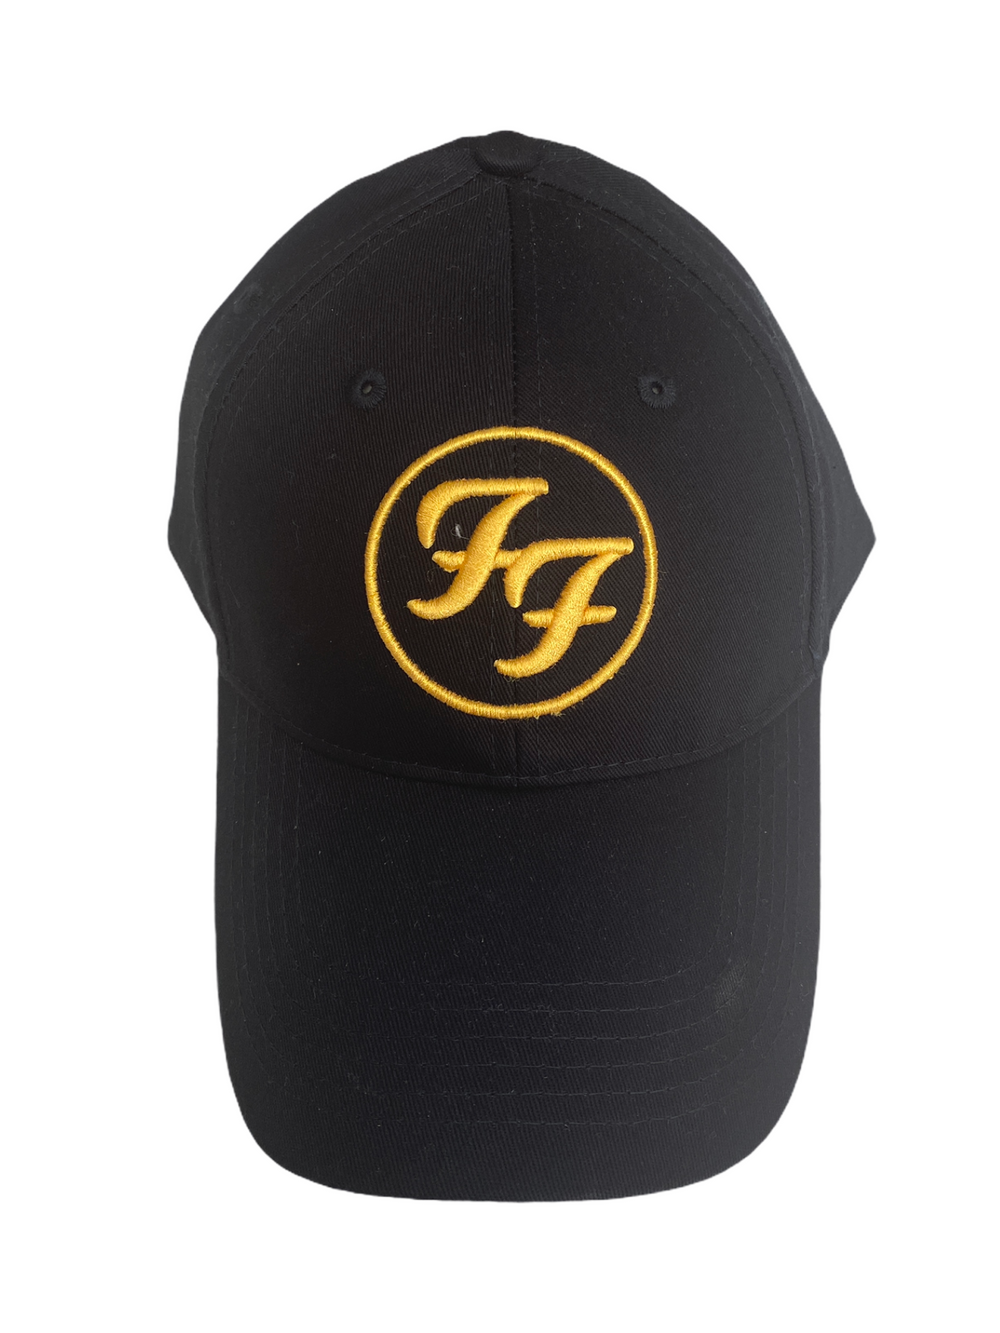 Foo Fighters The Official Embroidered Peak Cap Adjustable Brand New Gold FF